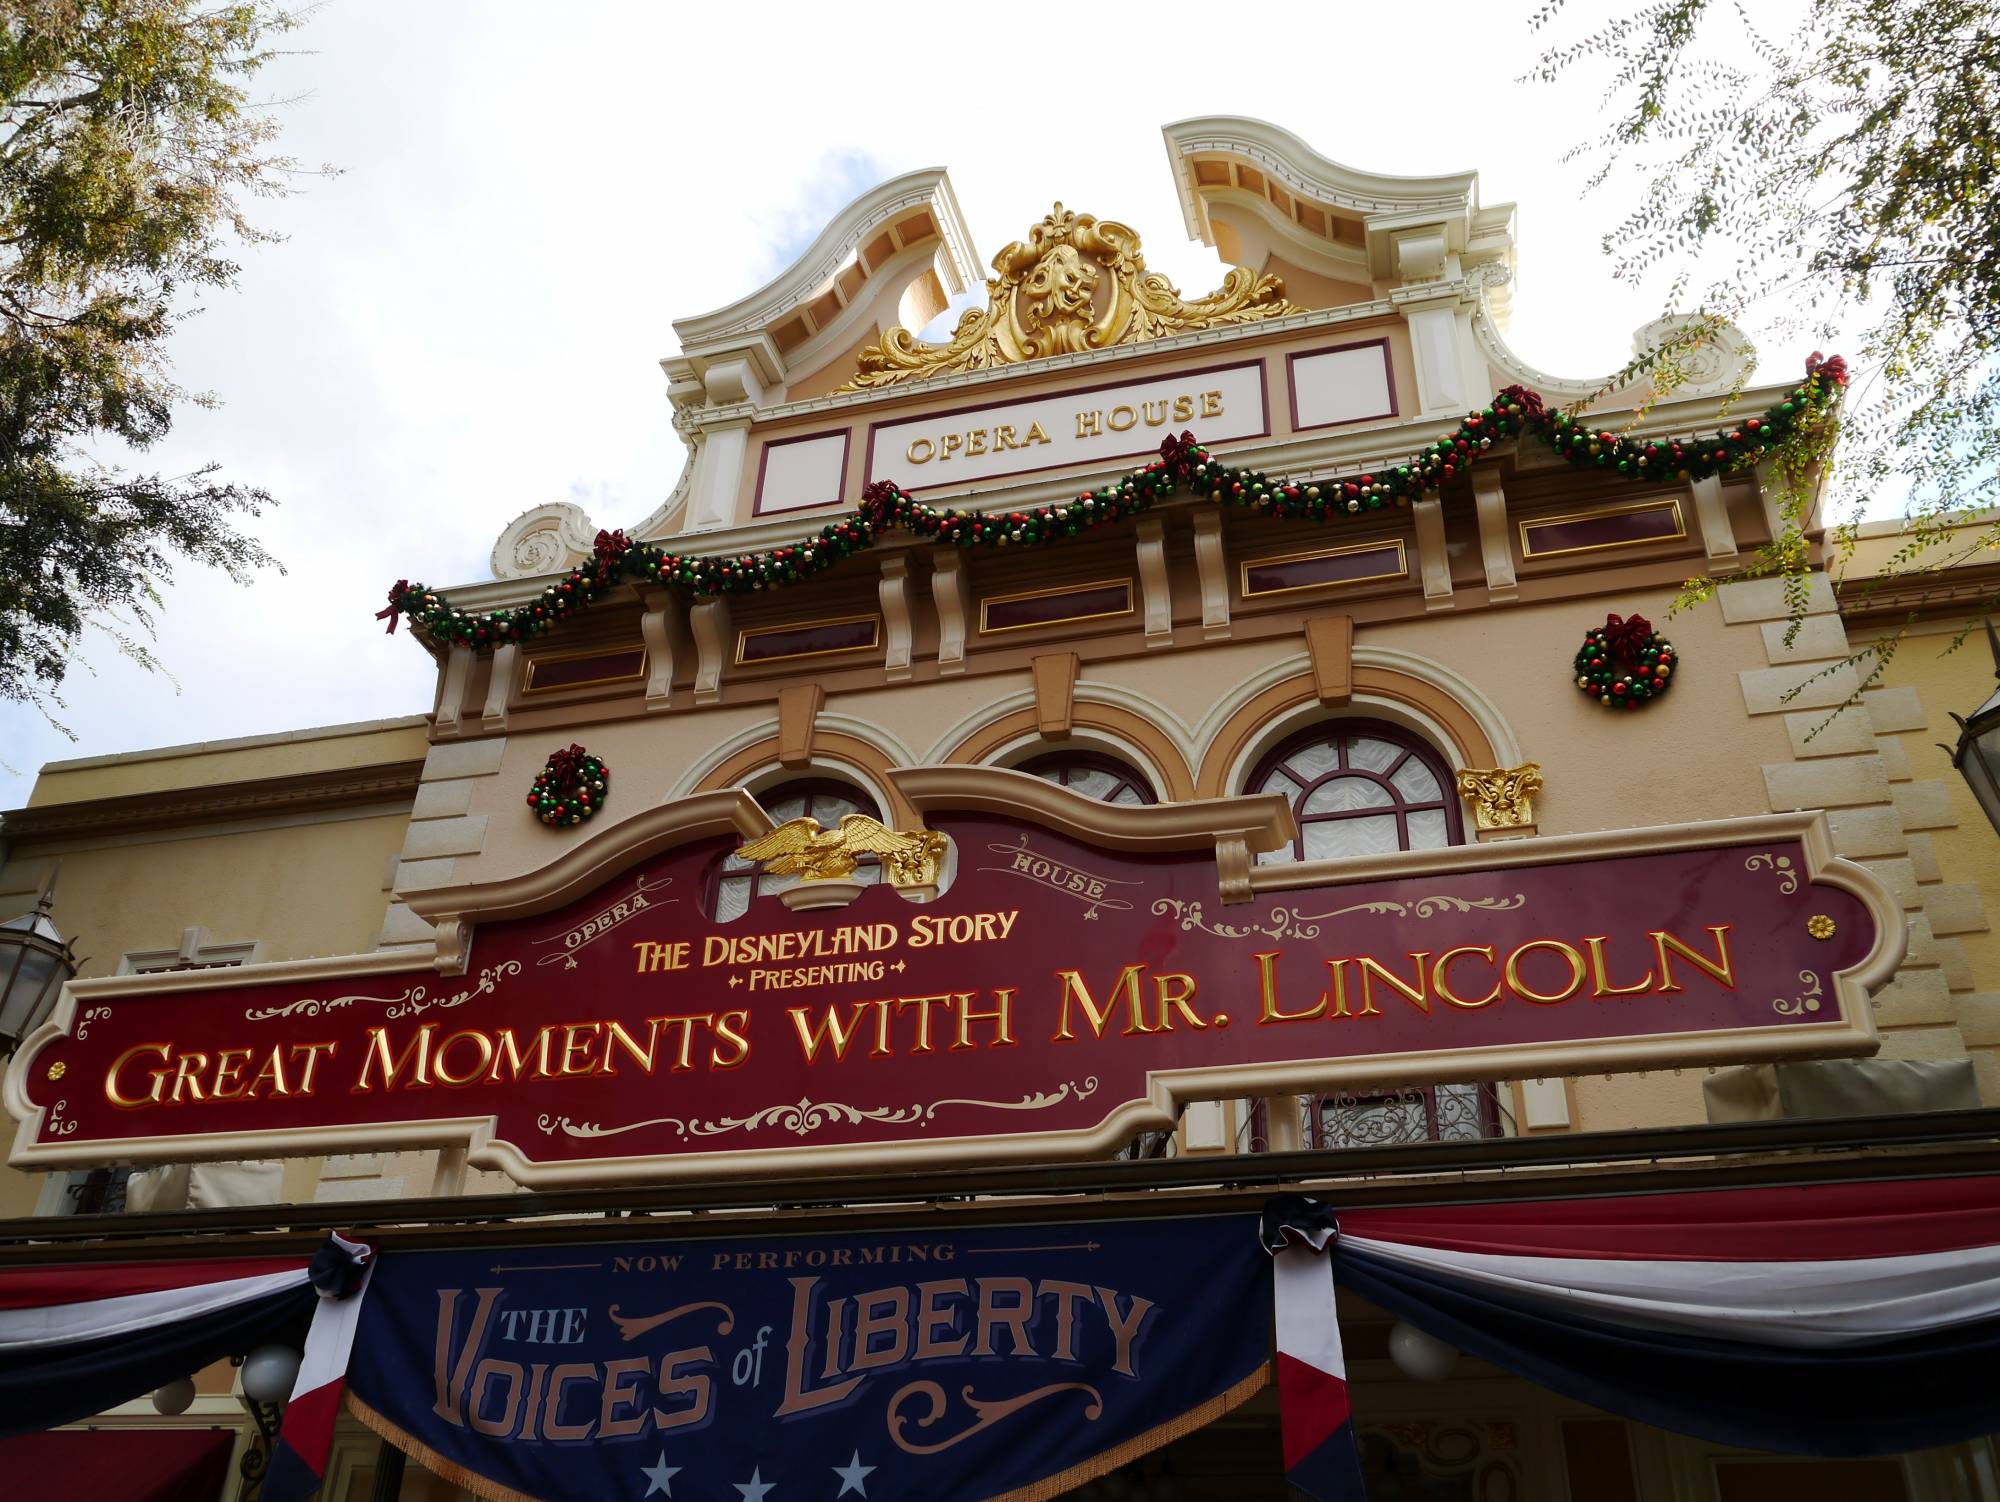 Explore a classic Disneyland attraction - Great Moments with Mr. Lincoln |PassPorter.com